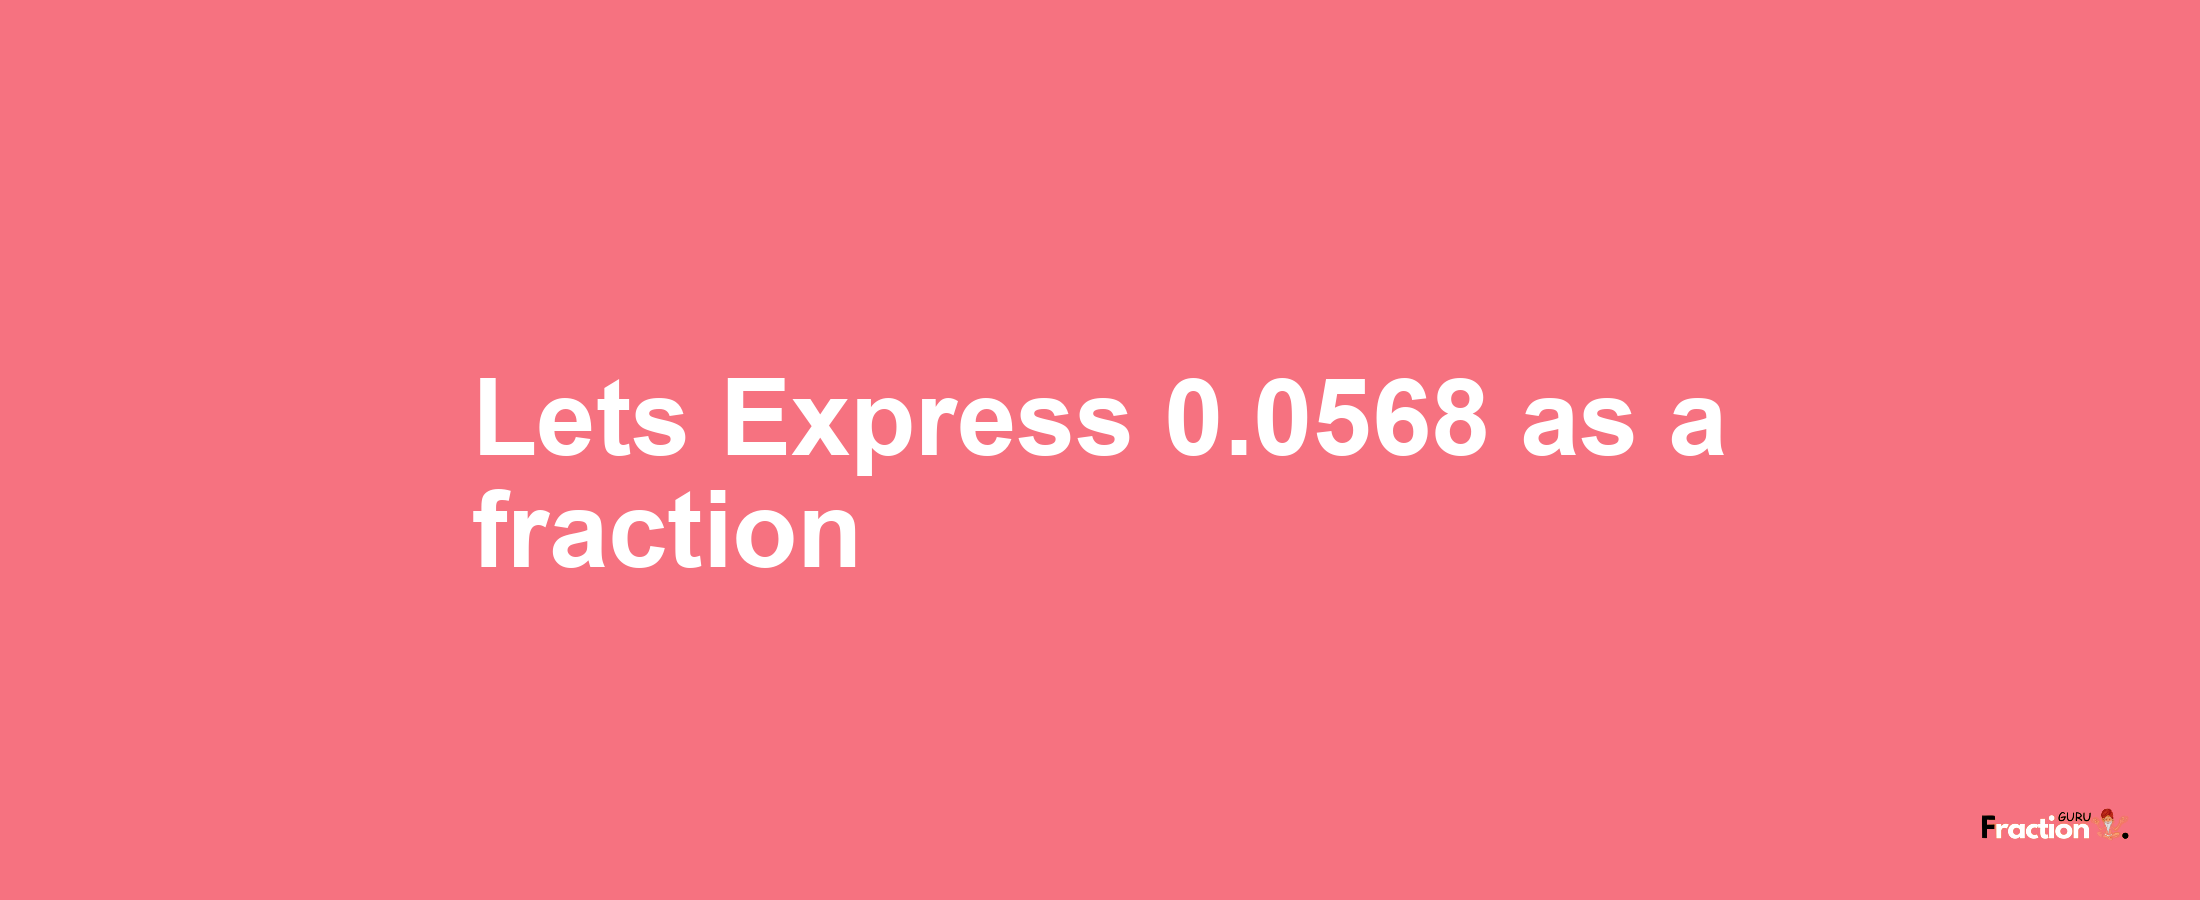 Lets Express 0.0568 as afraction